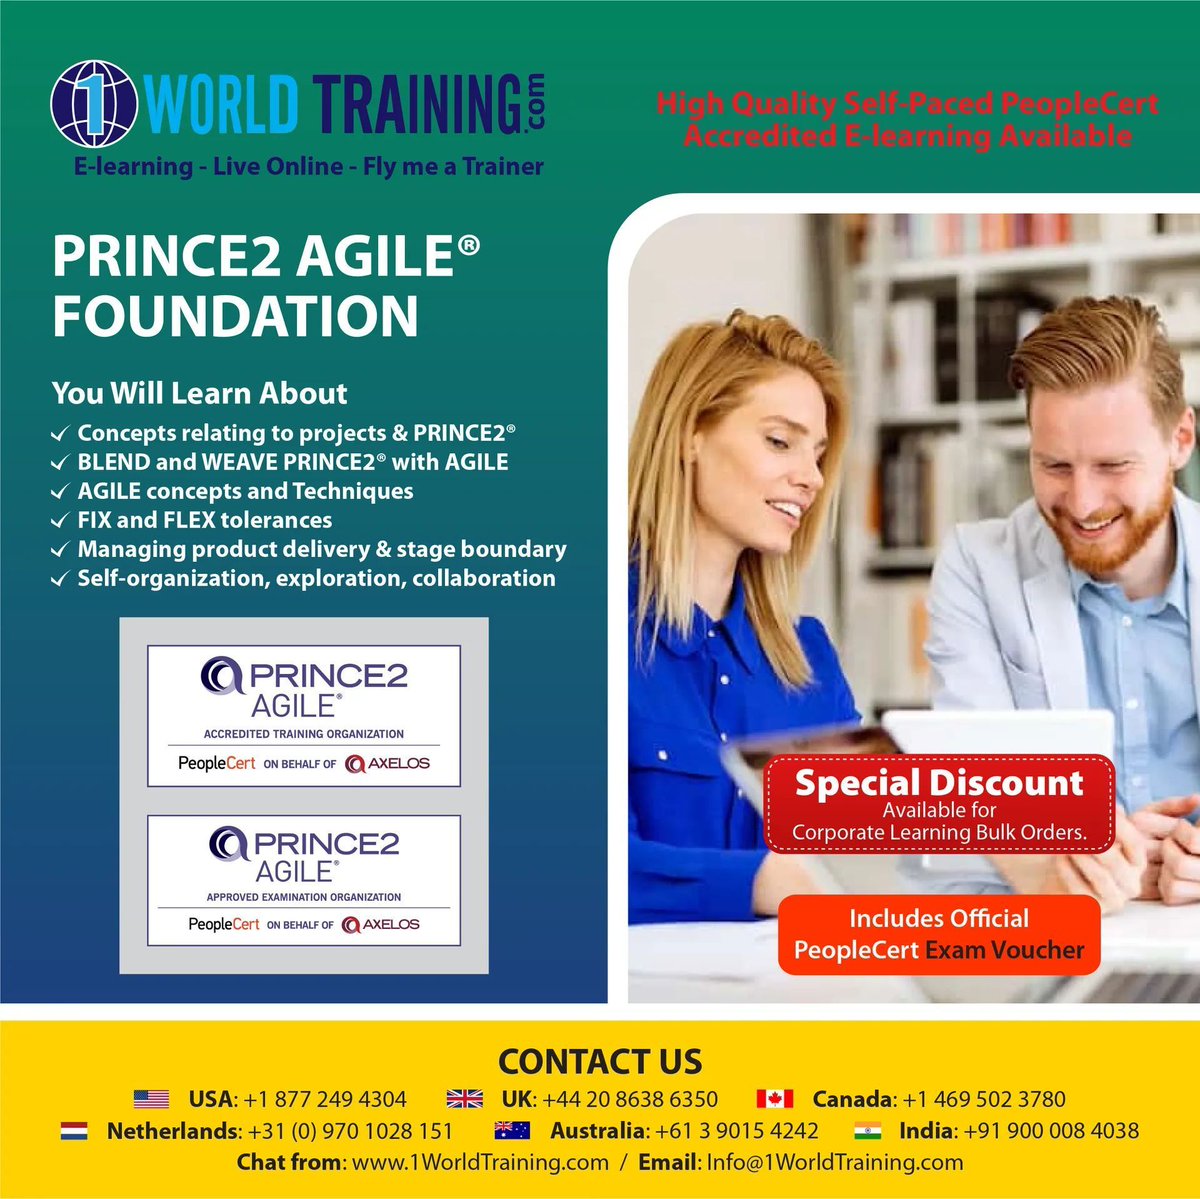 PRINCE2 Agile Foundation certificate. Management control when working in Agile environment. Live online batches. Self study available. #prince2foundation #prince2practitioner #1worldtraining #axelos